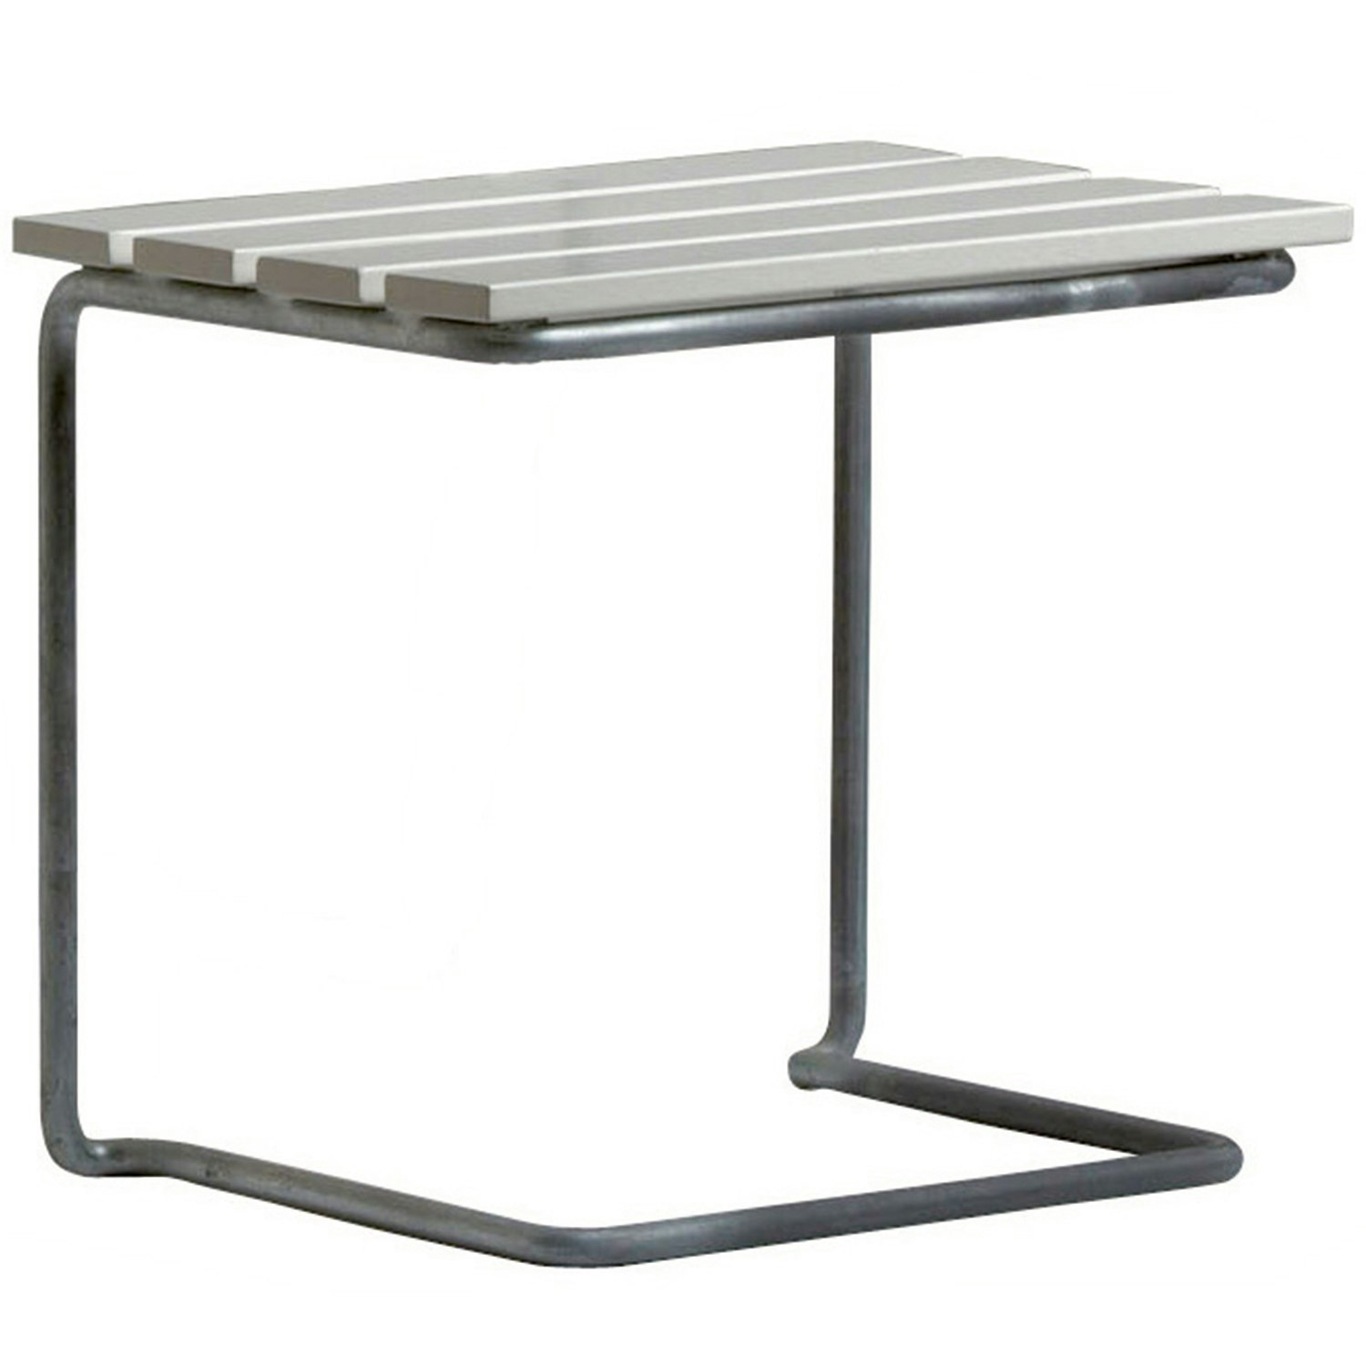 Footstool A3, White Lacquered Oak / Hot Galvanized Steel